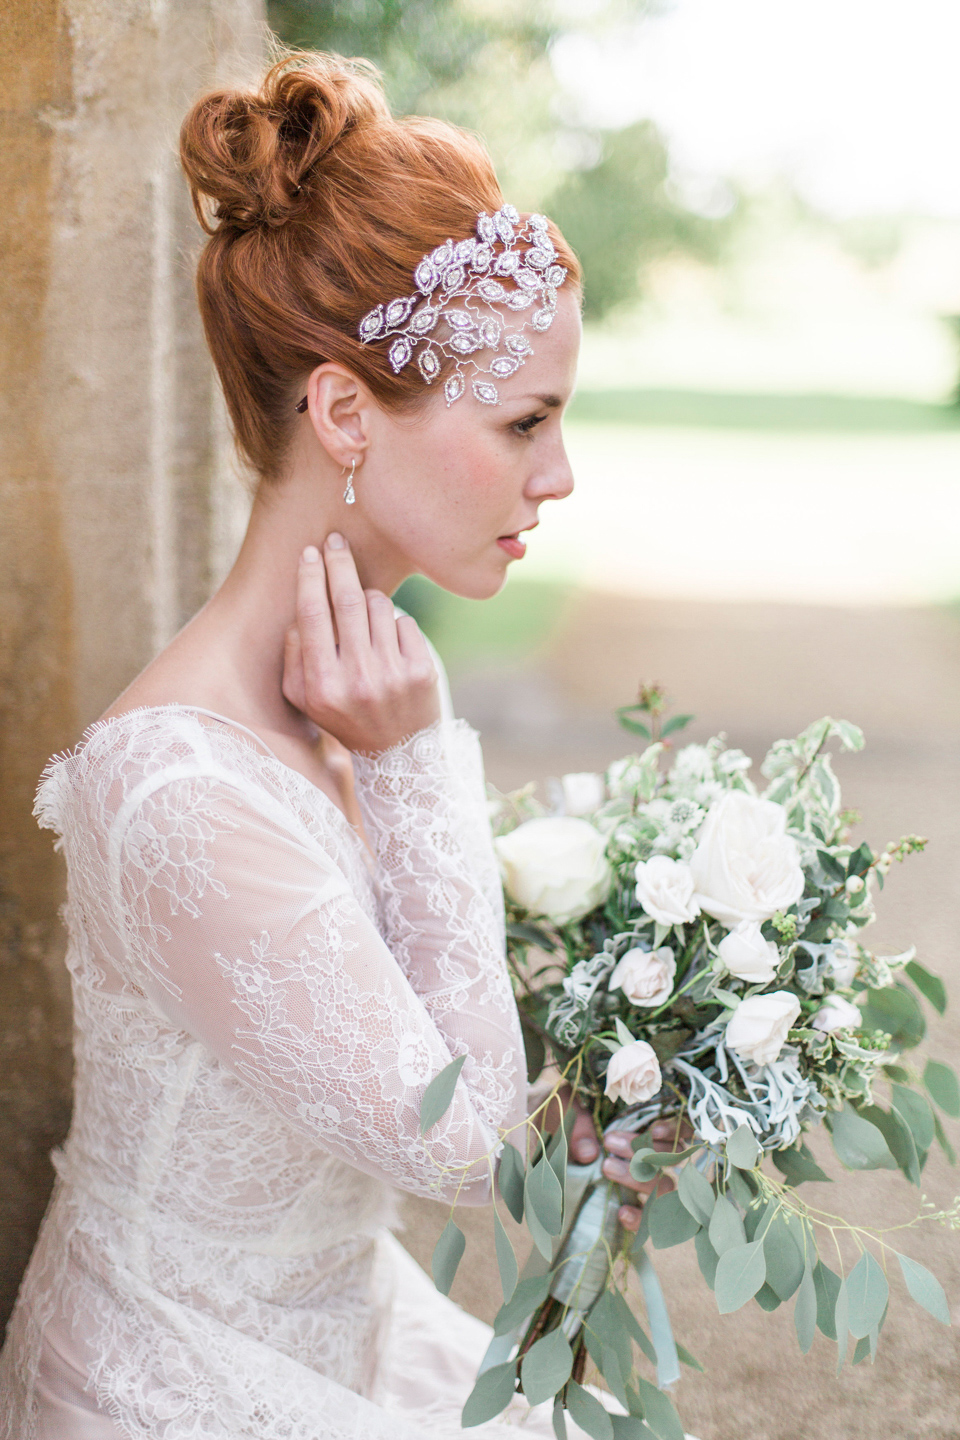 Hermione Harbut, dreamy, ethereal and delicate headpieces for brides. Visit hermioneharbutt.com.